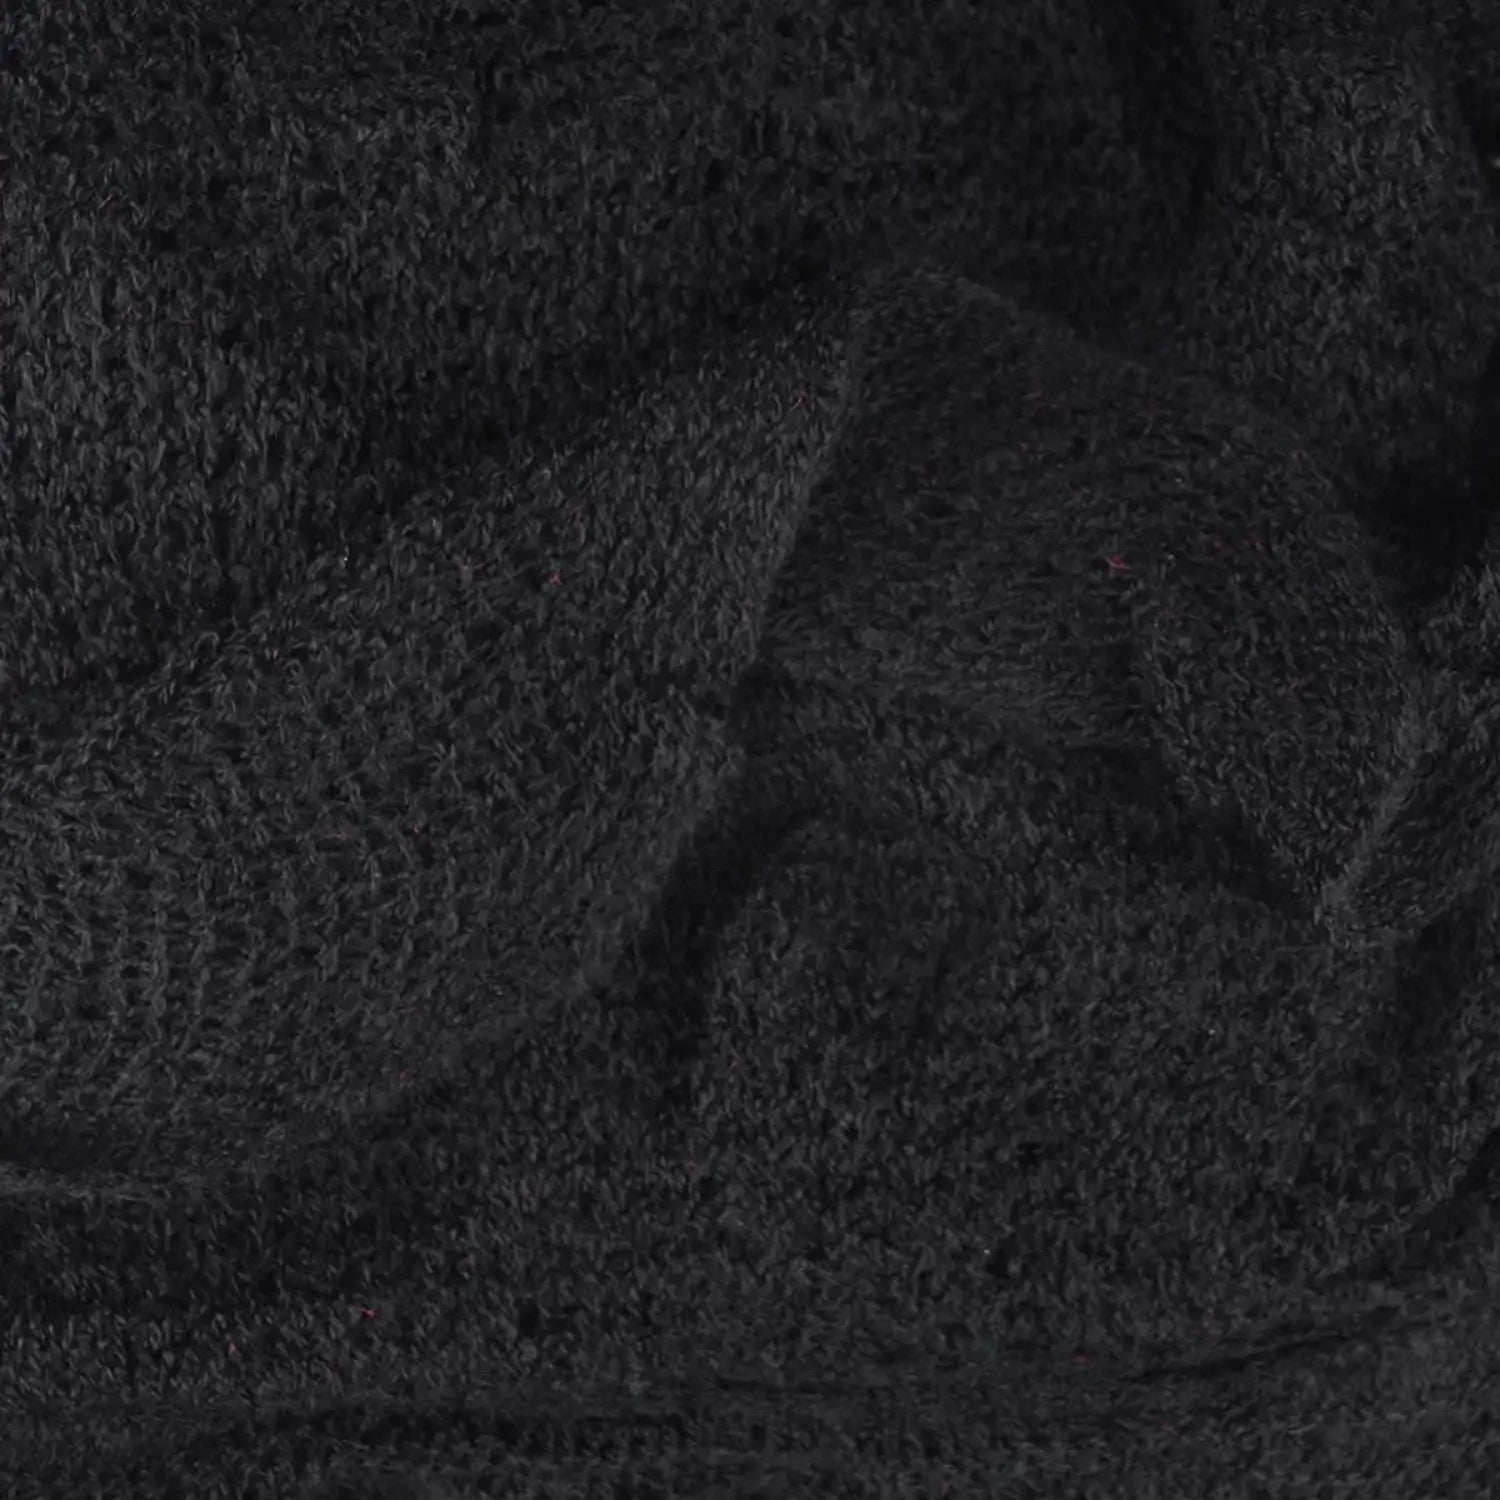 Lightweight knitted ruffled scarf in black with white background